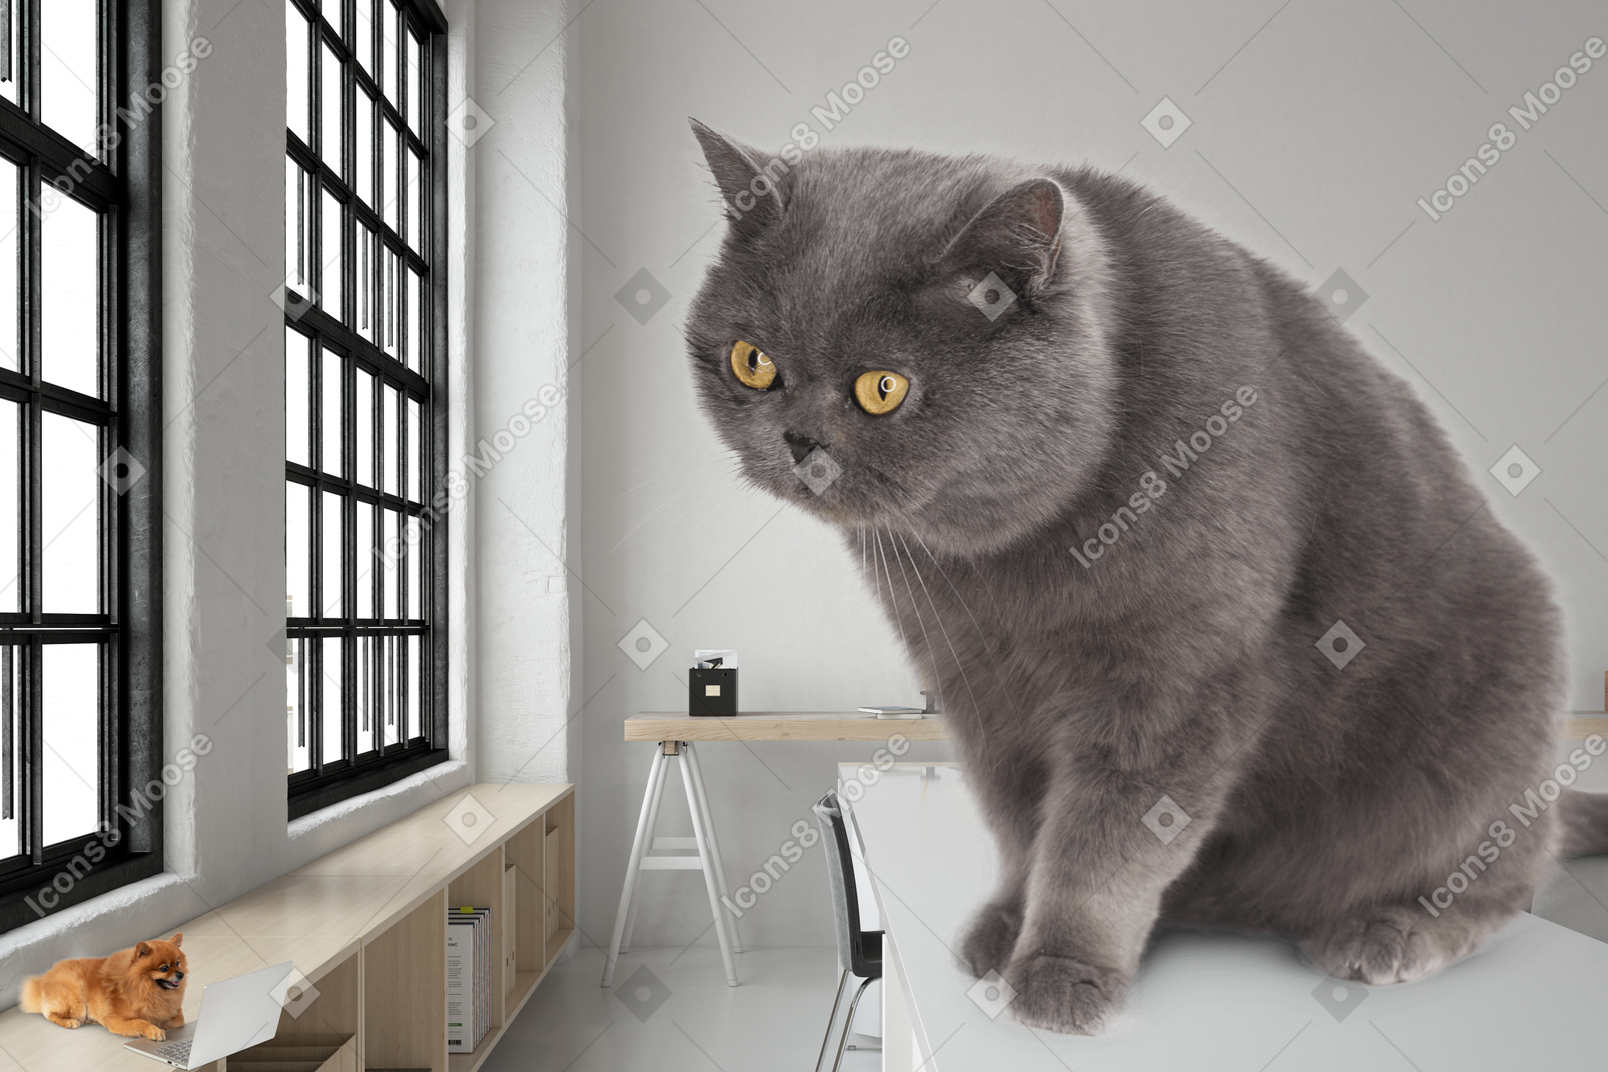 A gray cat sitting on top of a table next to a window